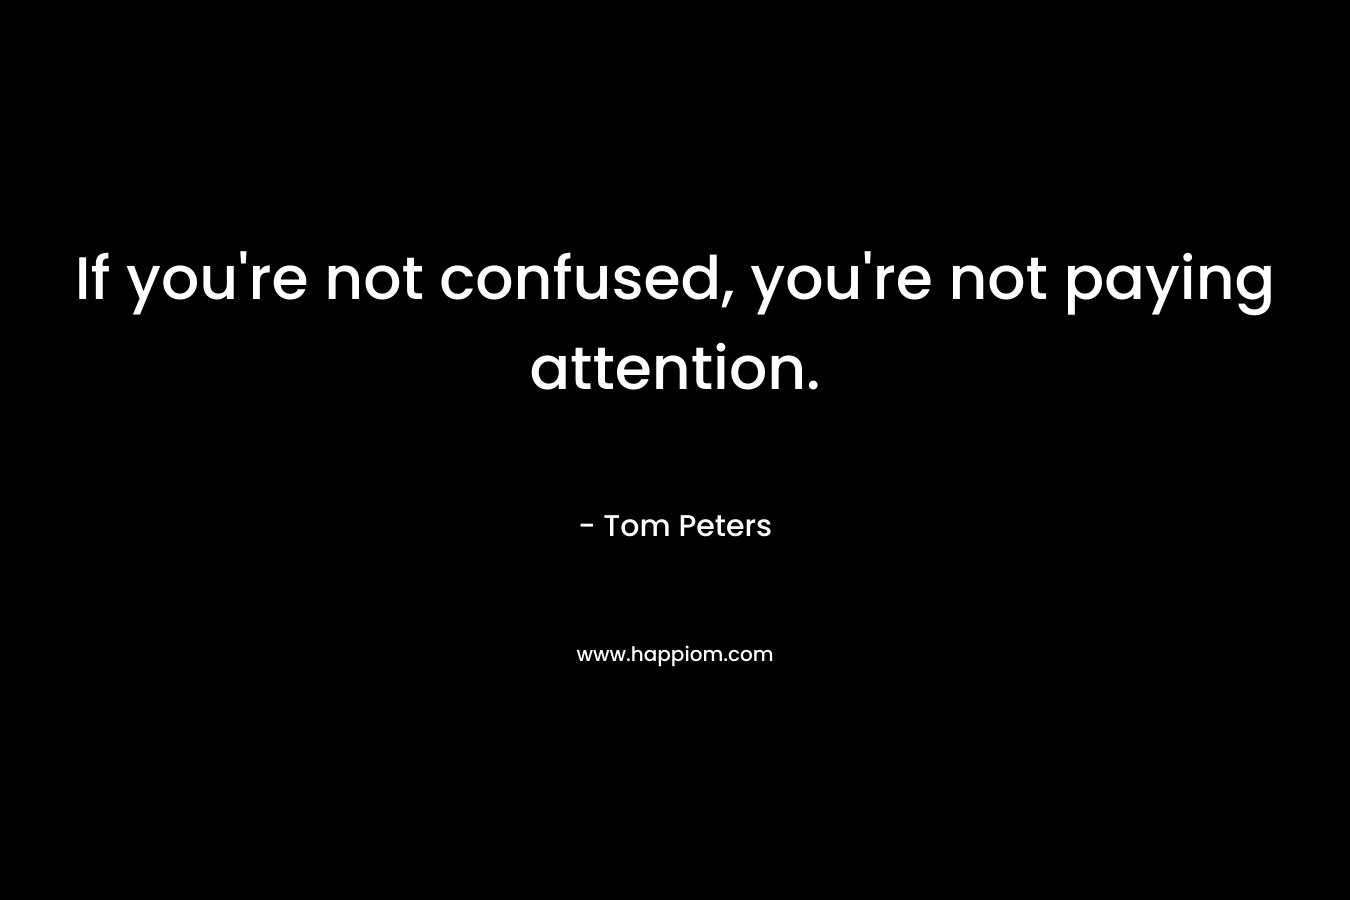 If you’re not confused, you’re not paying attention. – Tom Peters